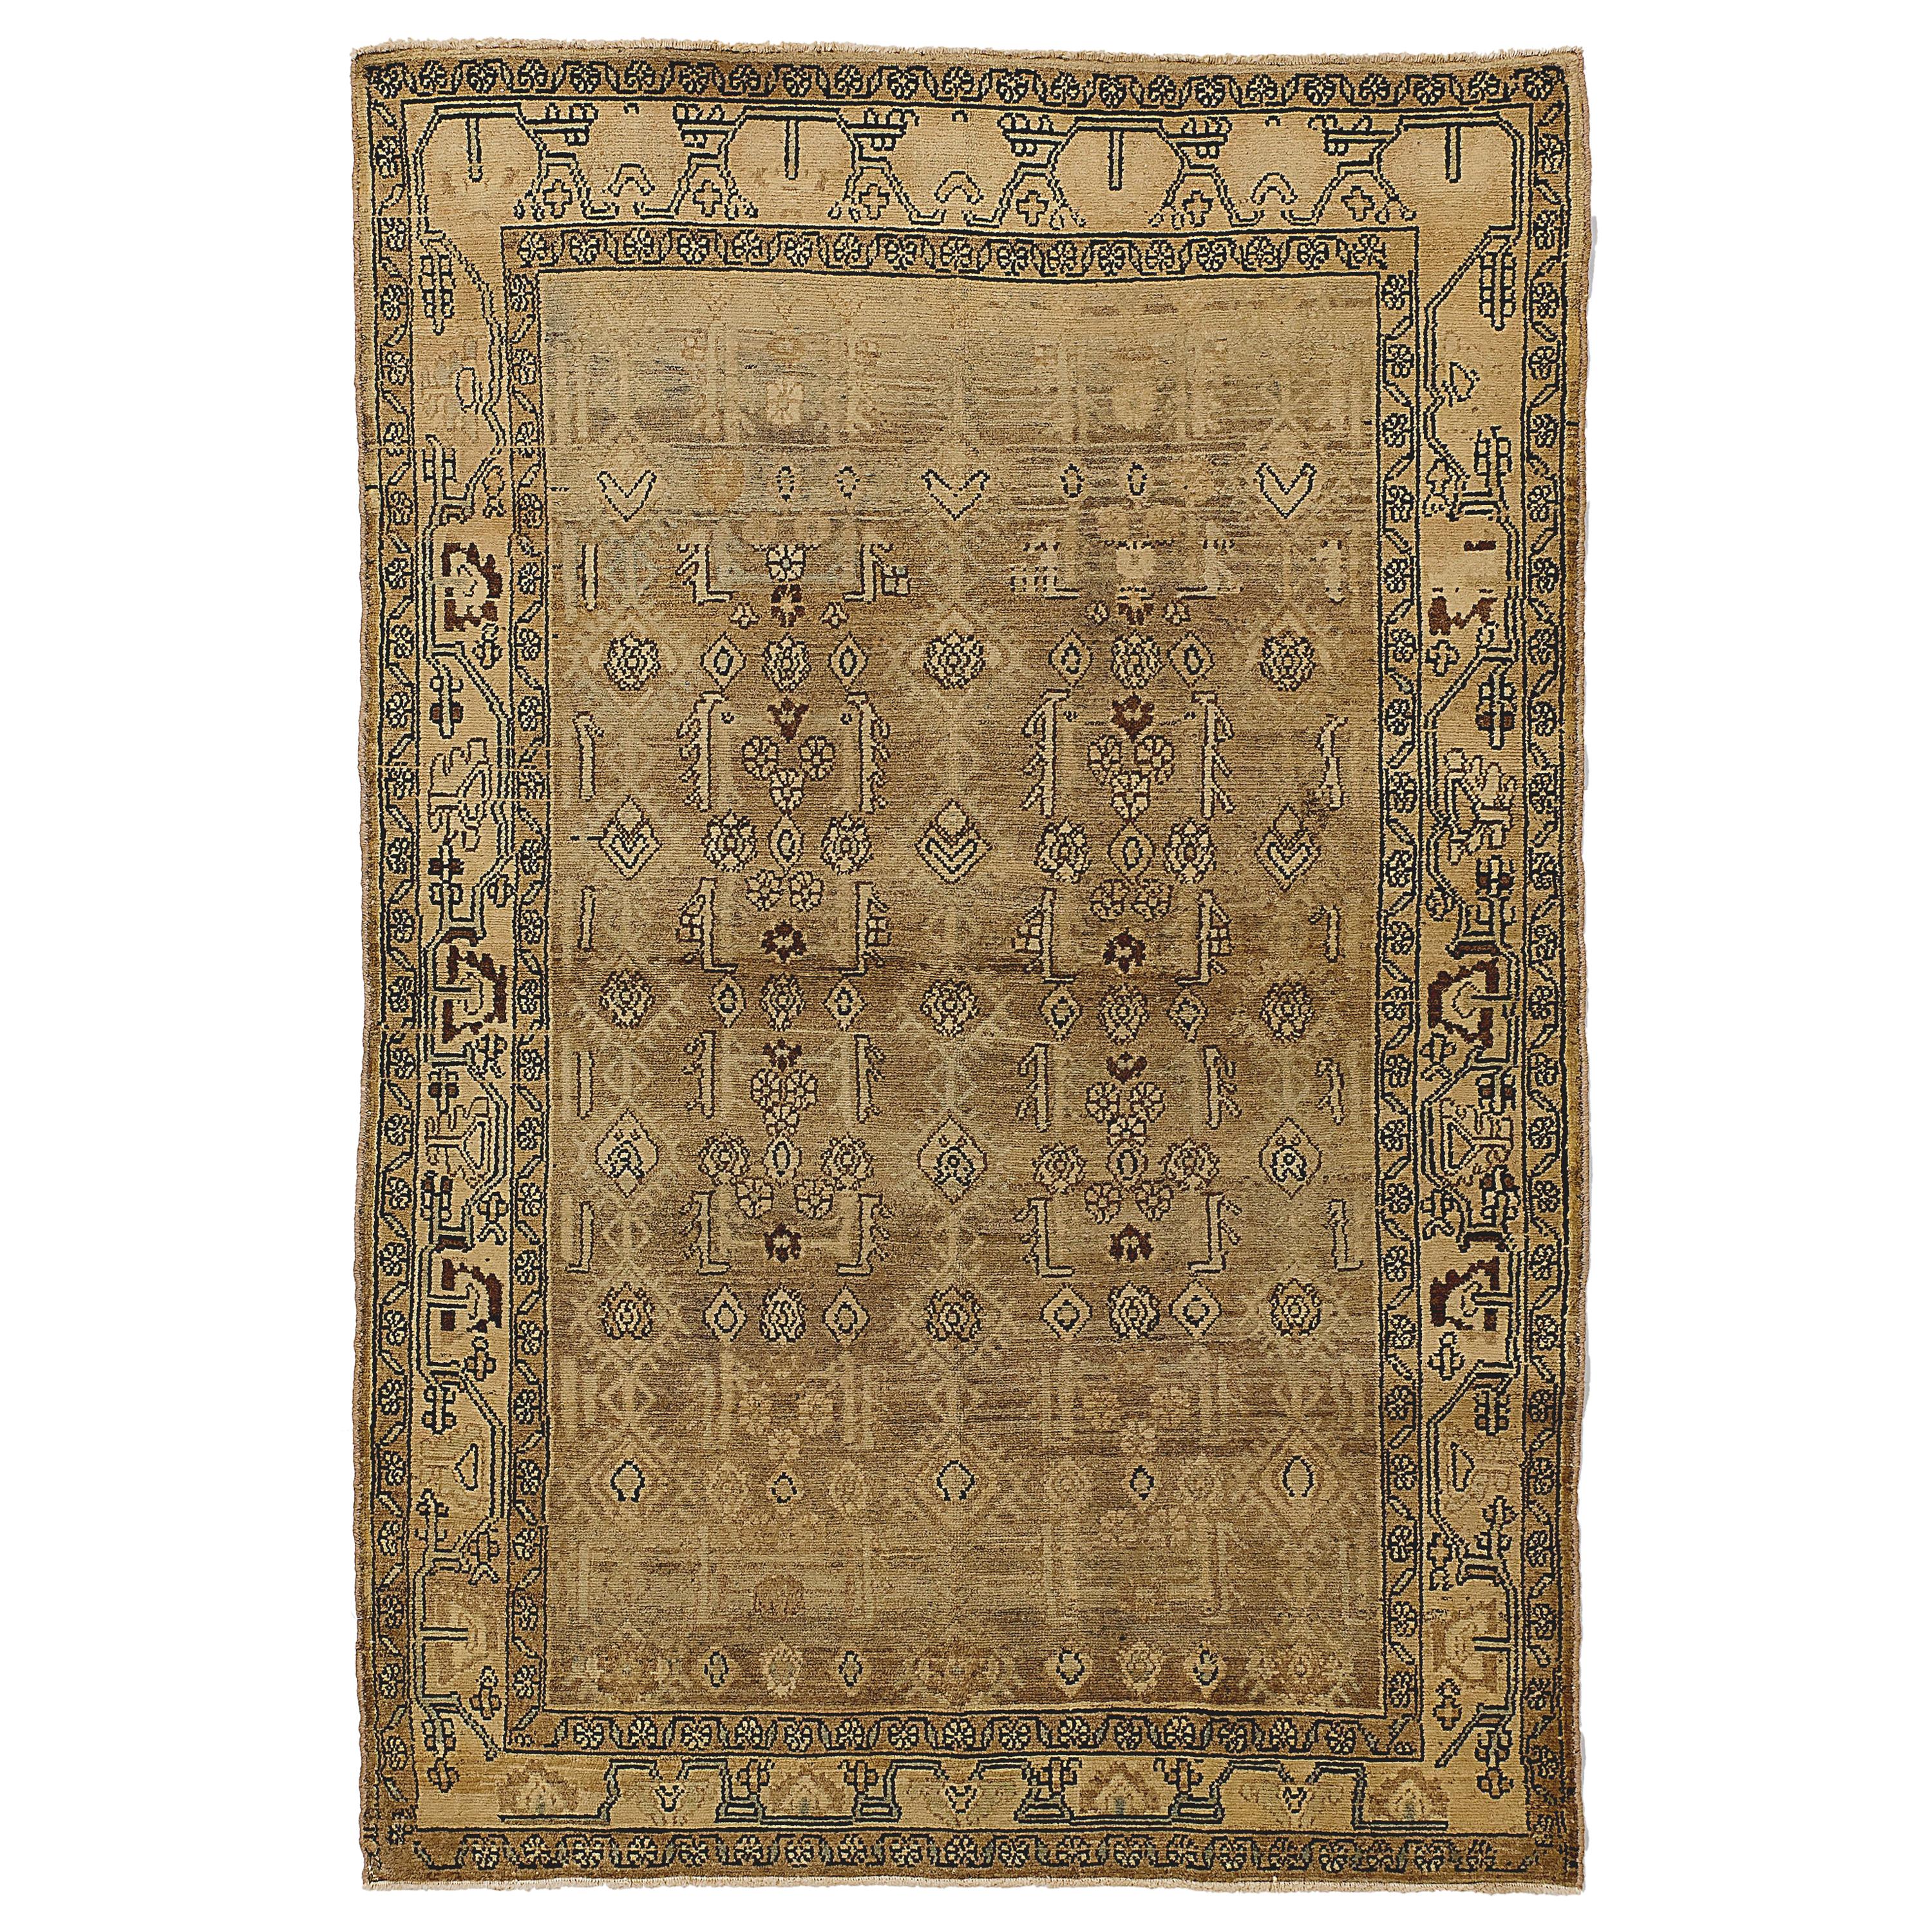 Antique Persian Malayer Rug with ‘Boteh’ Details on Beige Field